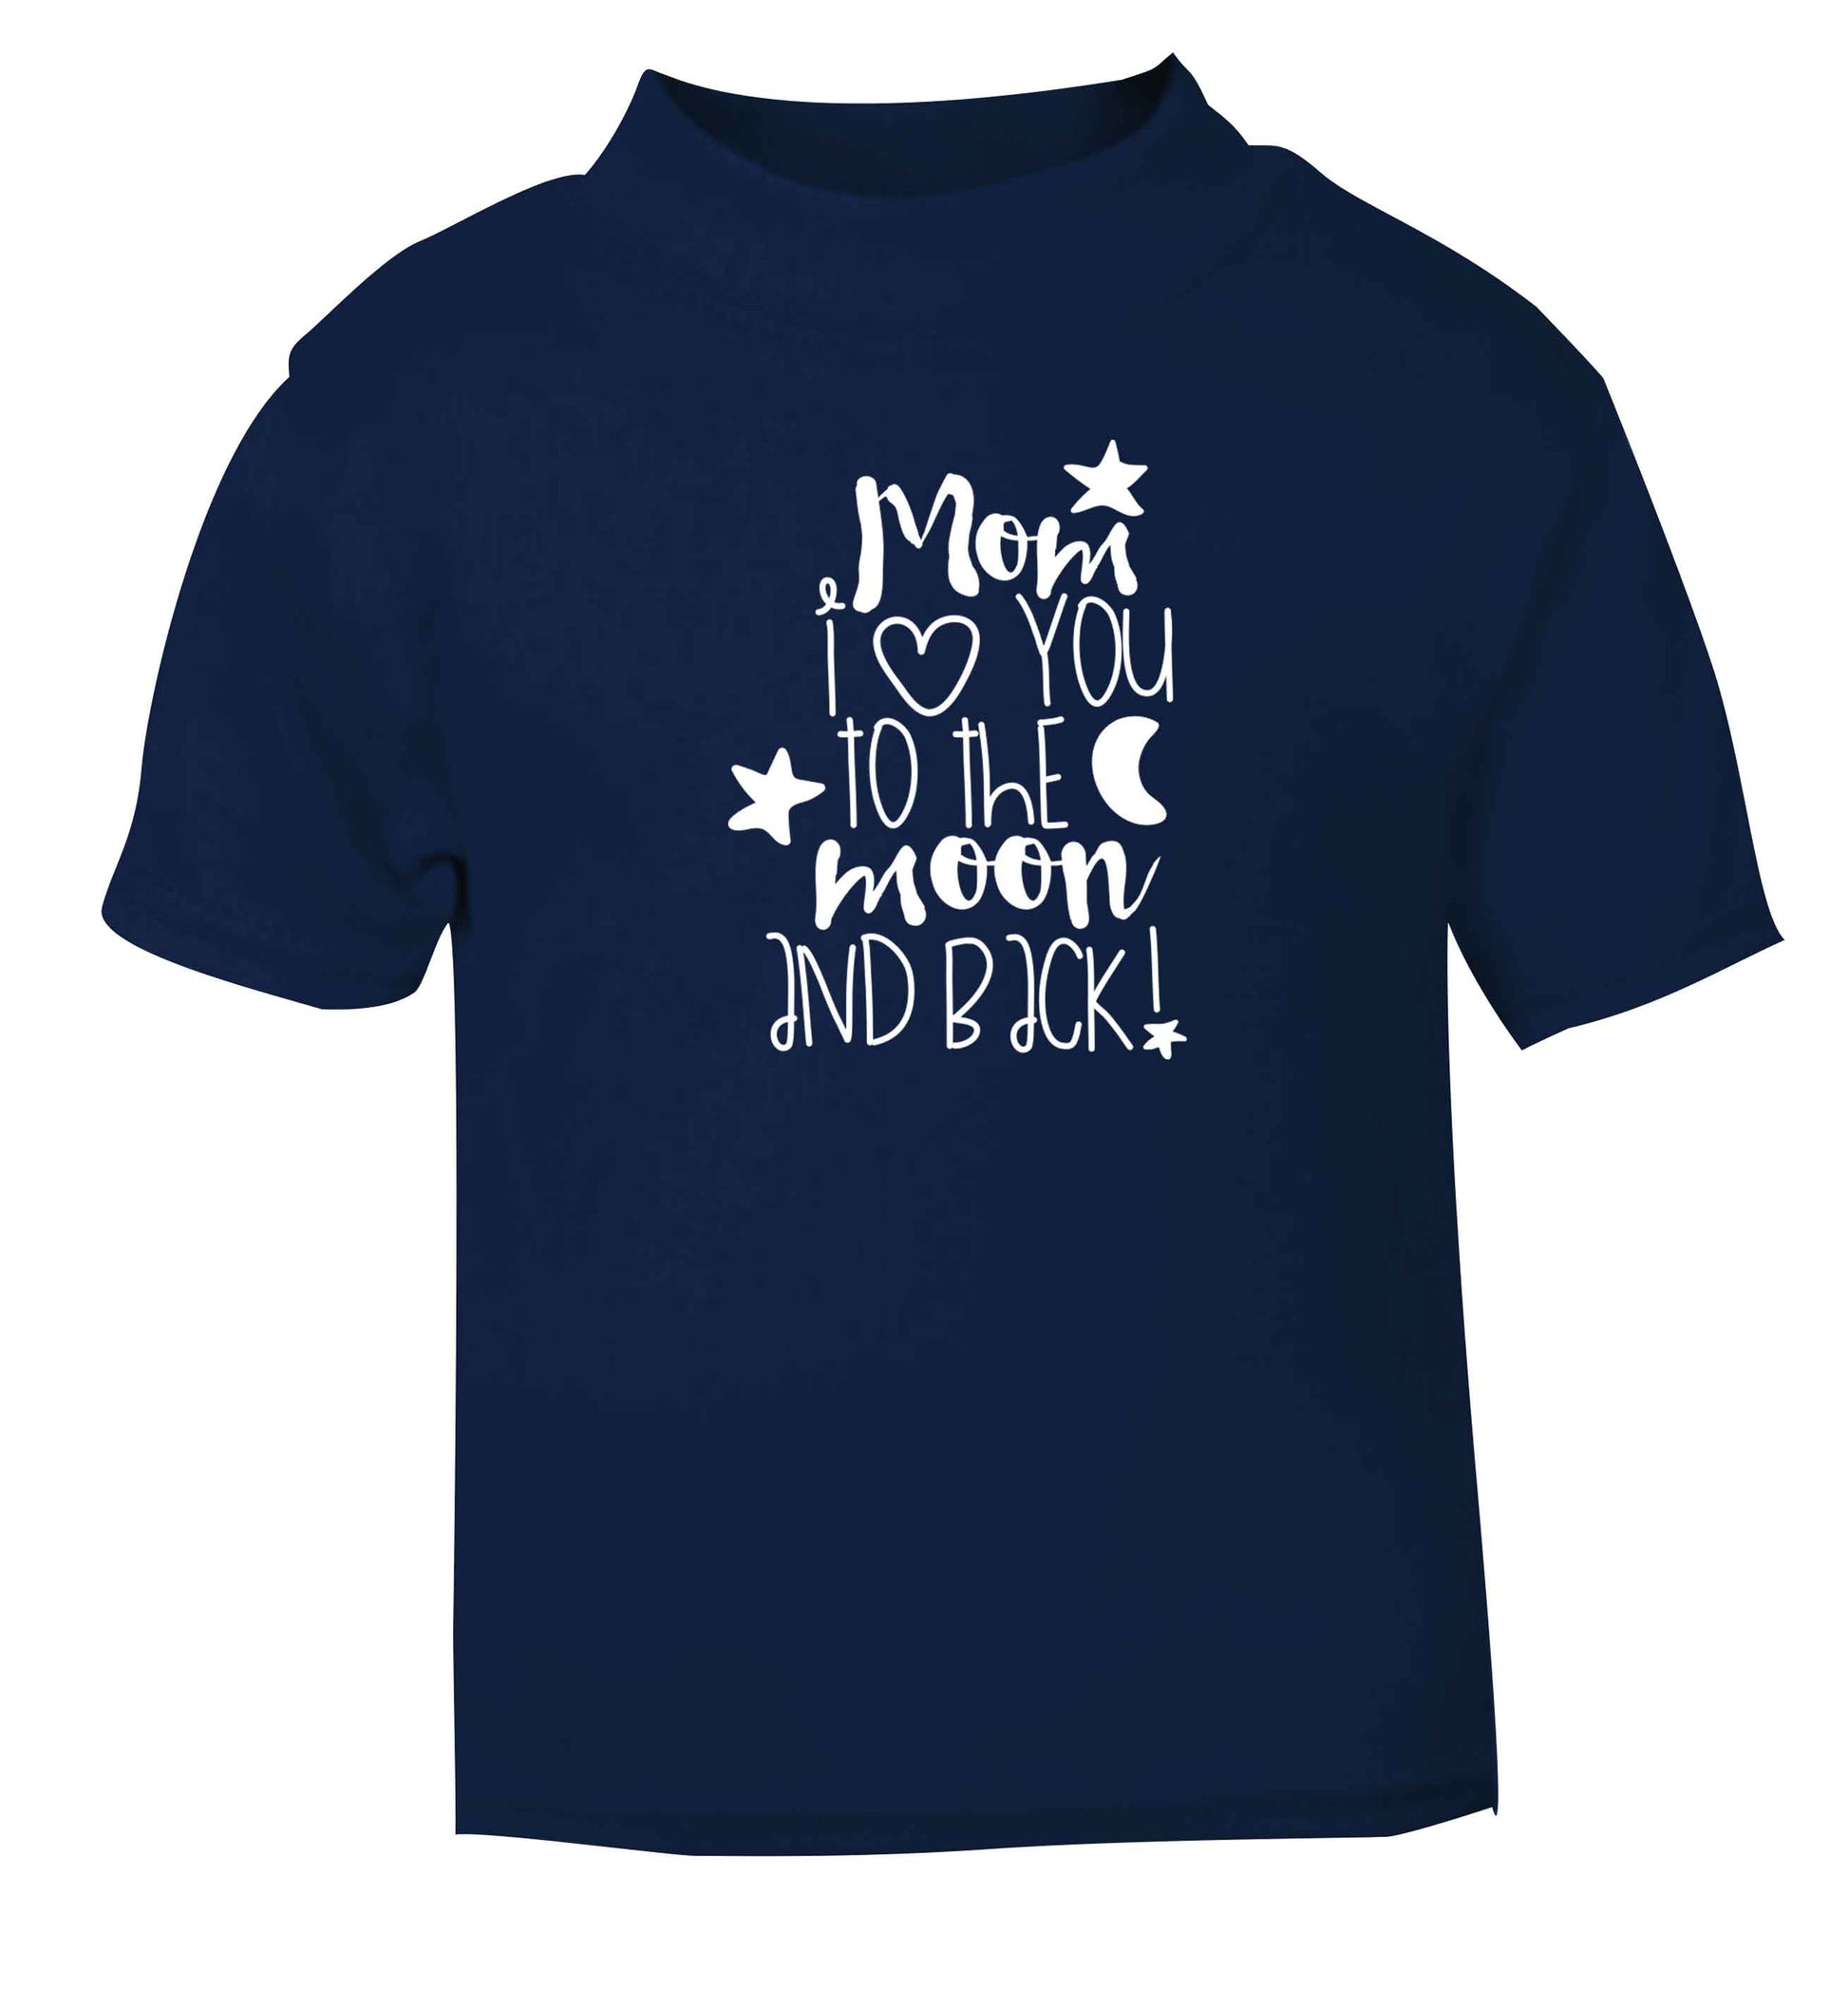 Mom I love you to the moon and back navy baby toddler Tshirt 2 Years